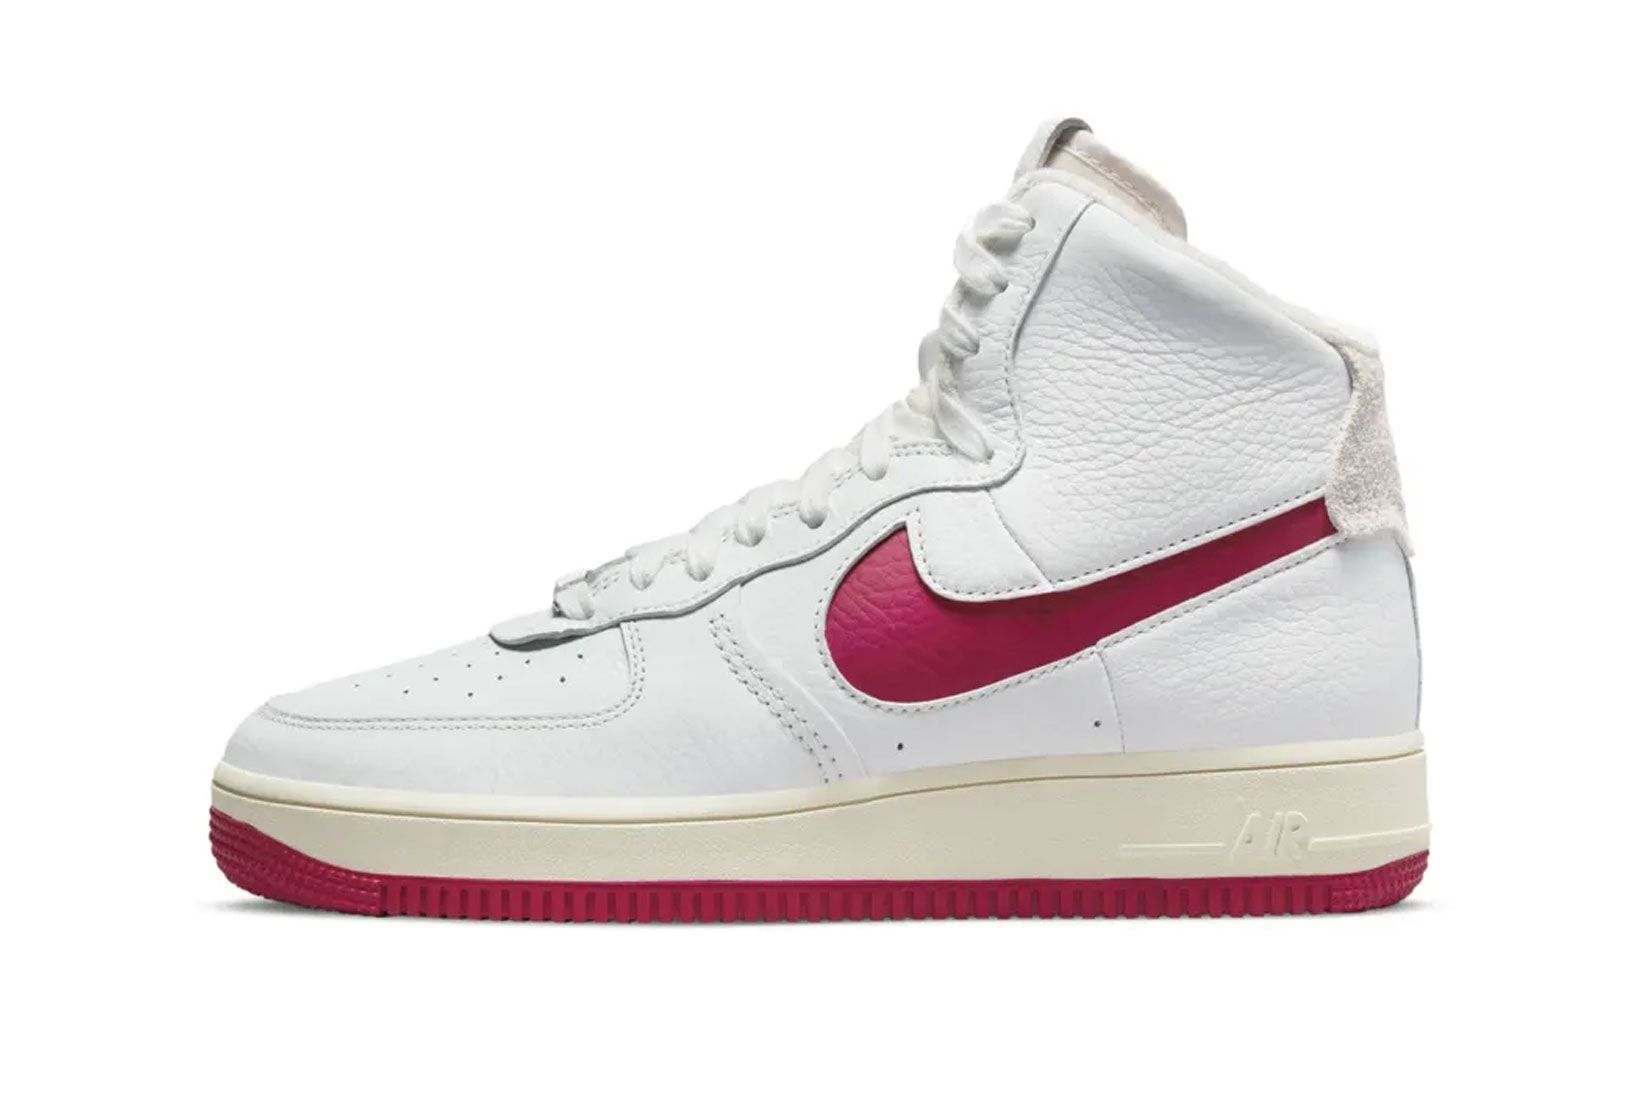 Nike Air Force 1 High Sculpt Women's Sneakers Gym Red Release